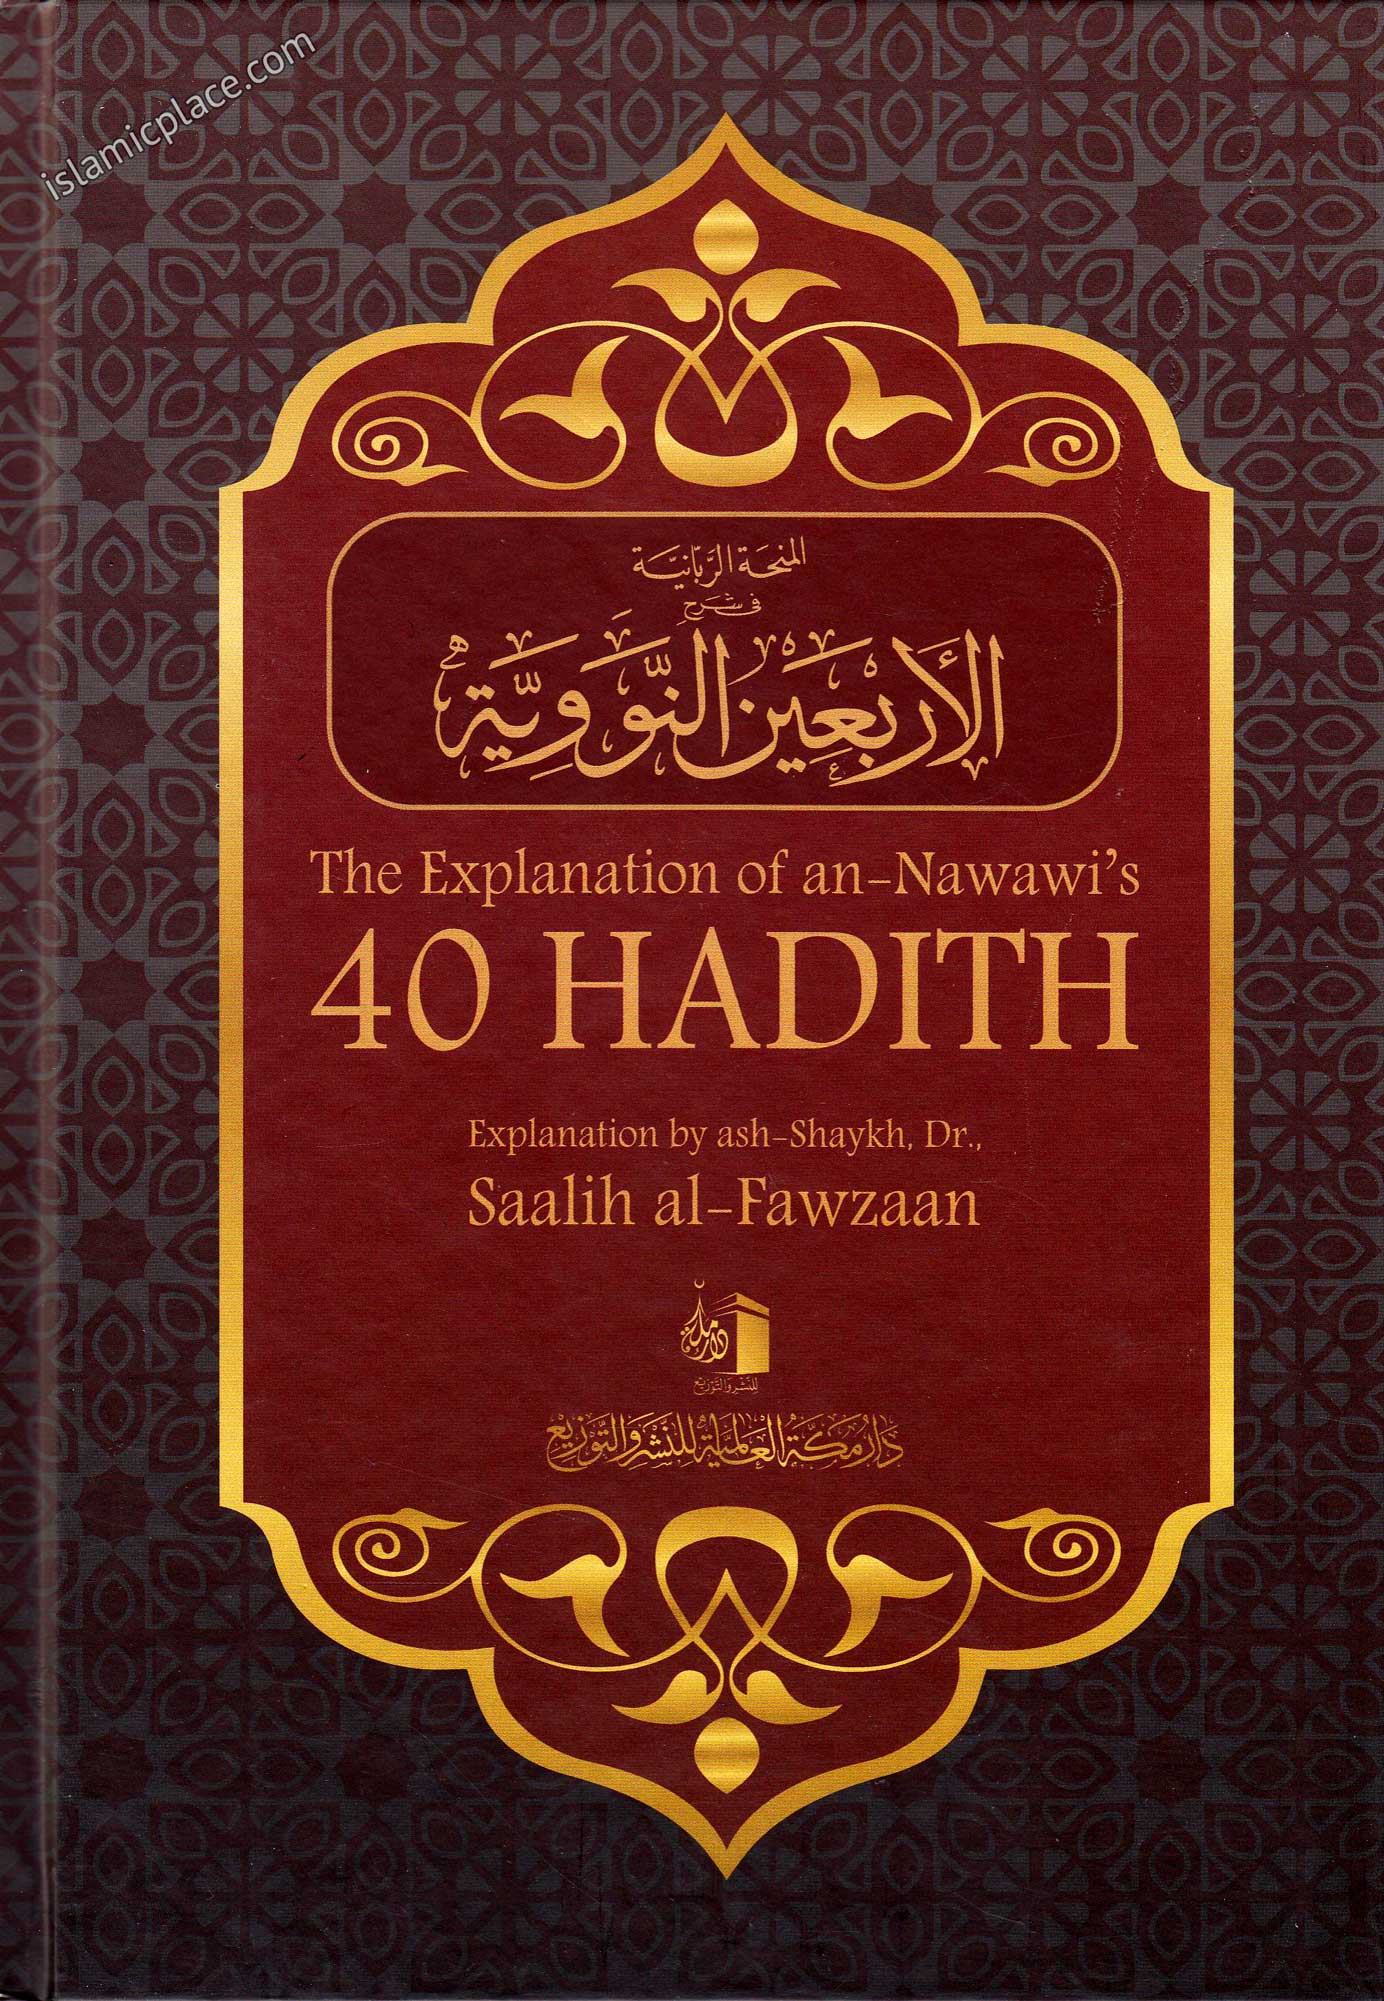 The Explanation of an-Nawawi's 40 Hadith by Fawzaan